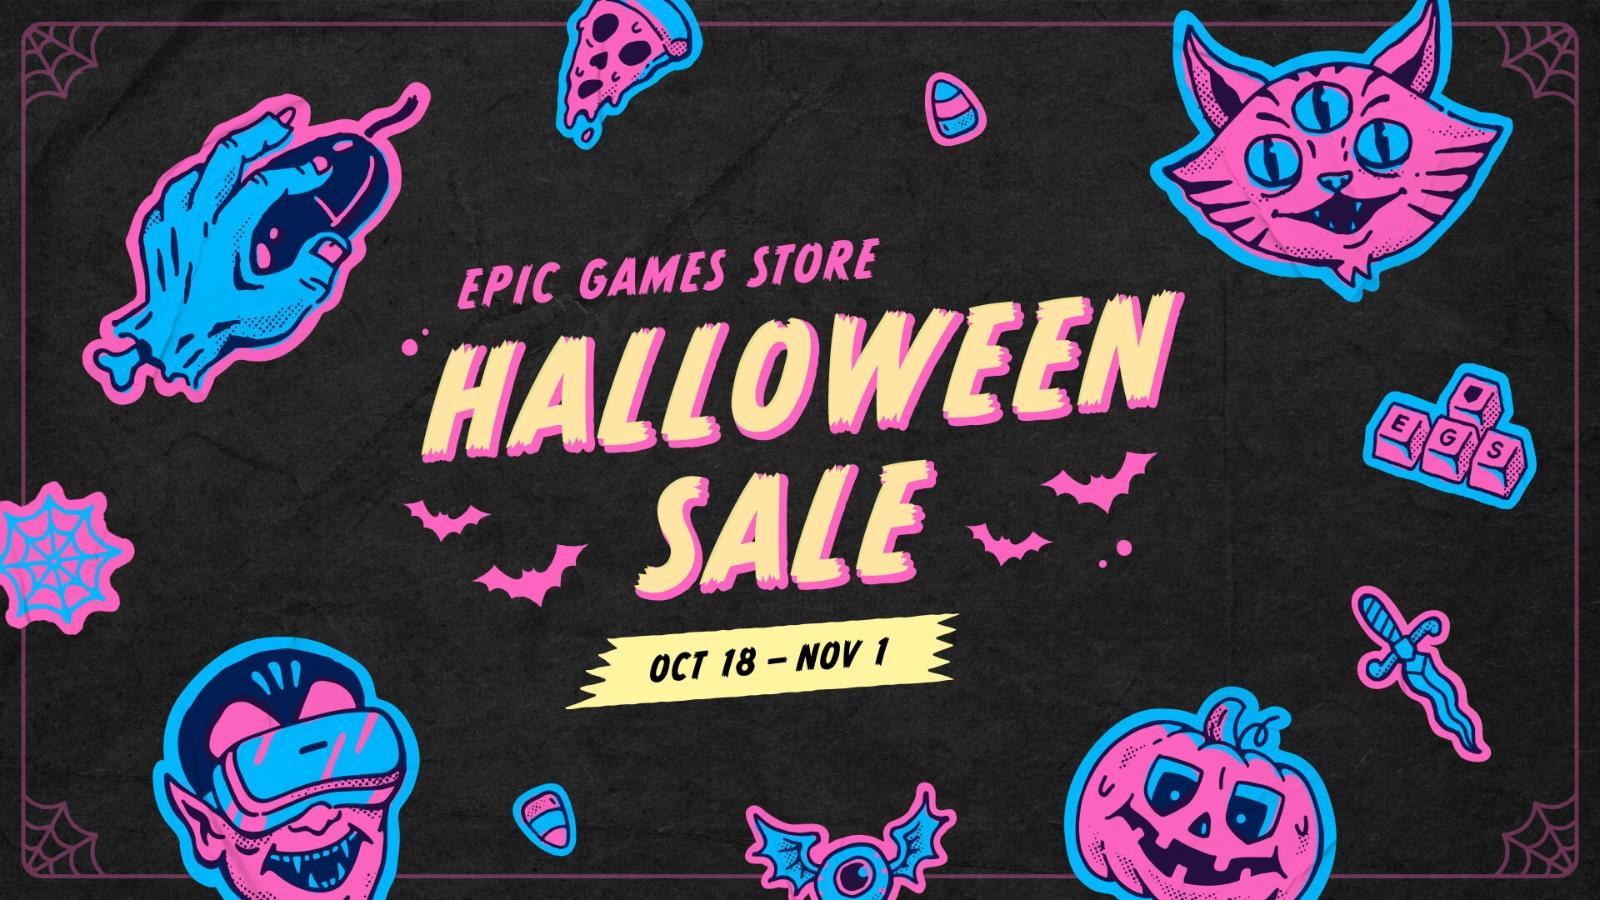 Epic Games Store: who is it the bestest for?